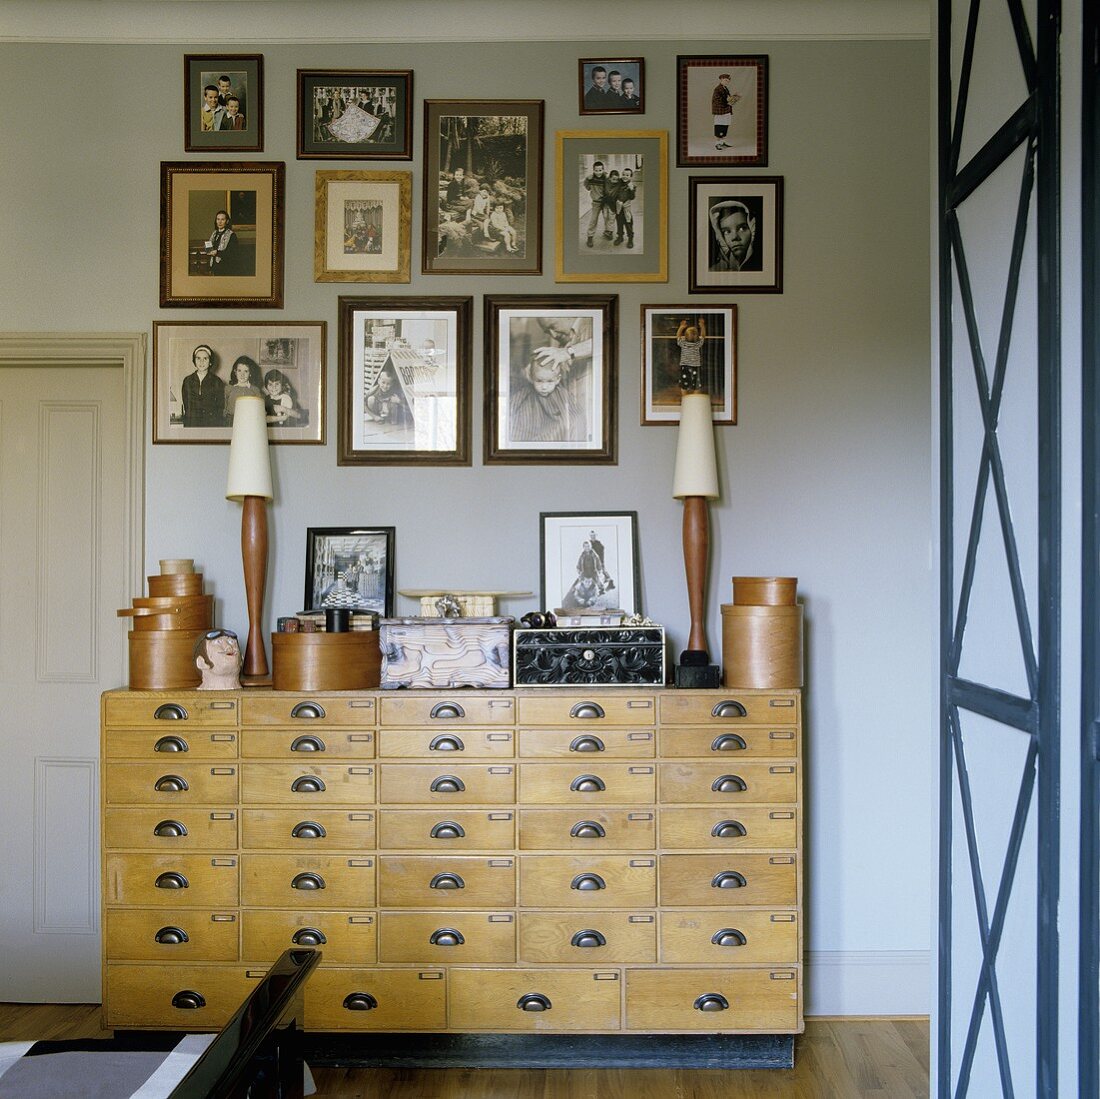 An old apothecary chest of drawers with a collection of photos hanging on the wall above it